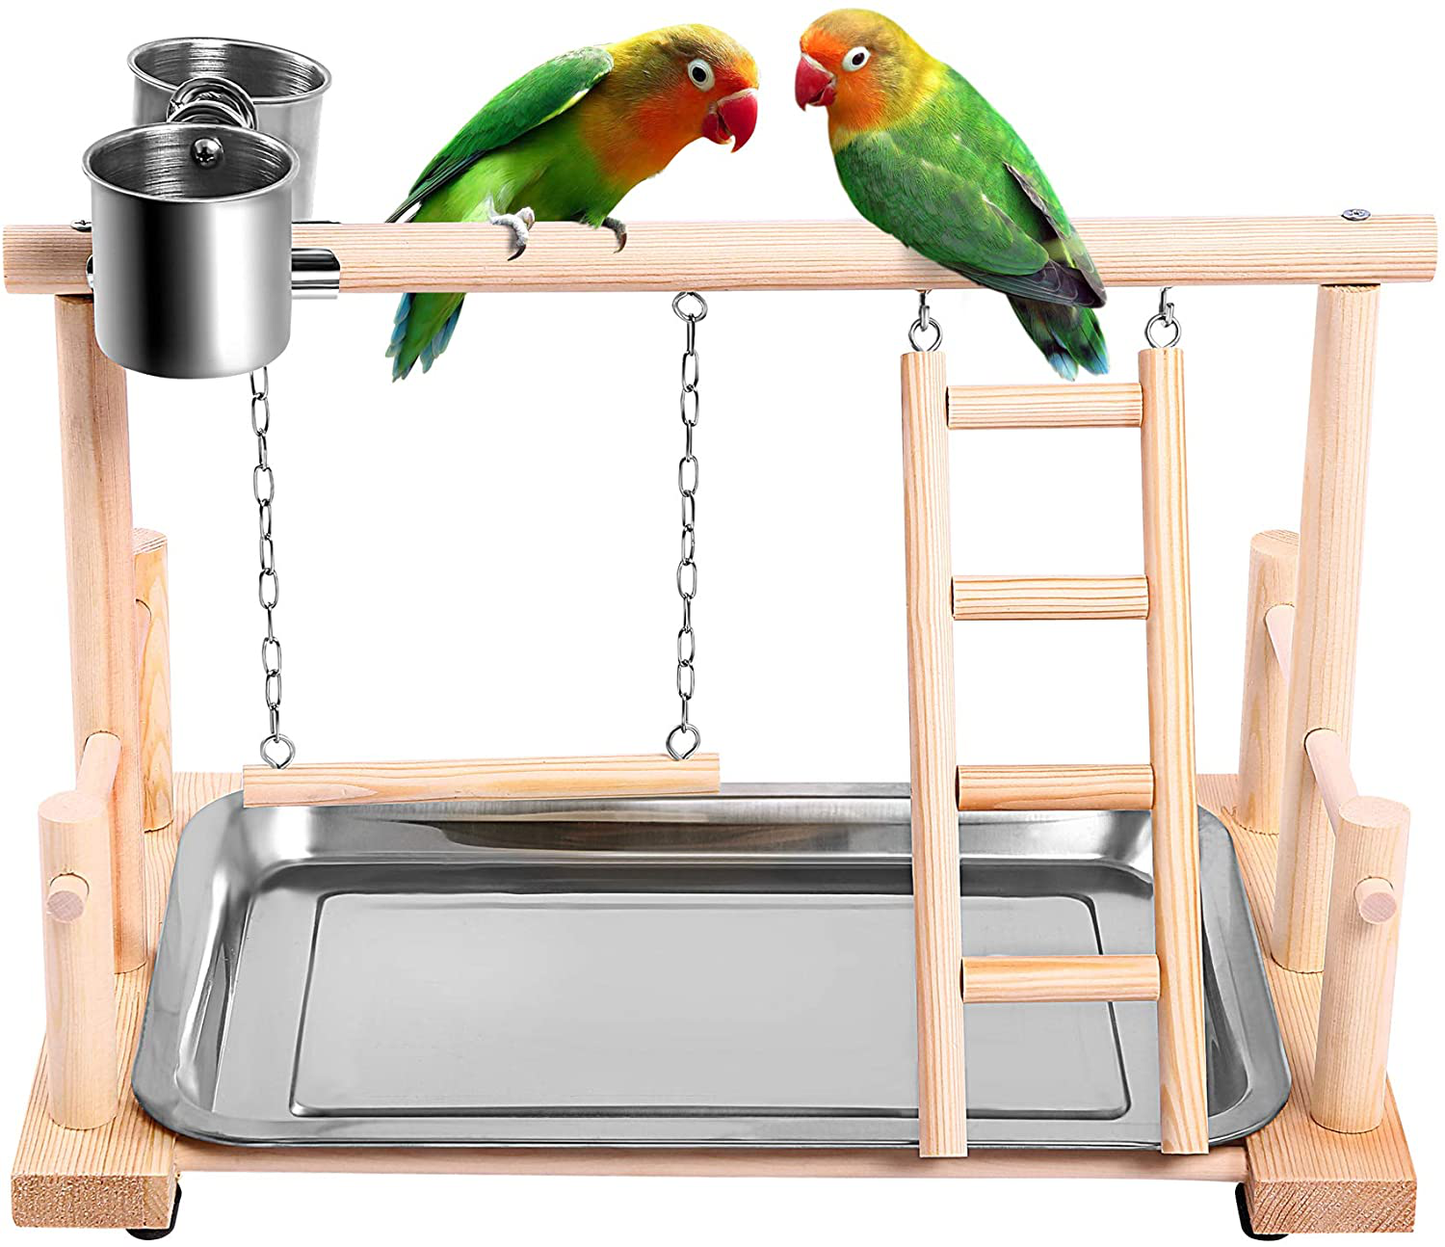 SAWMONG Bird Playgroud Parrots Wood Perch Playstand Stand Playpen Ladder with Feeder Seed Cups, Bird Ropes, Toys Exercise Play for Cockatiels, Conures, Parakeets, Finch Small Animals